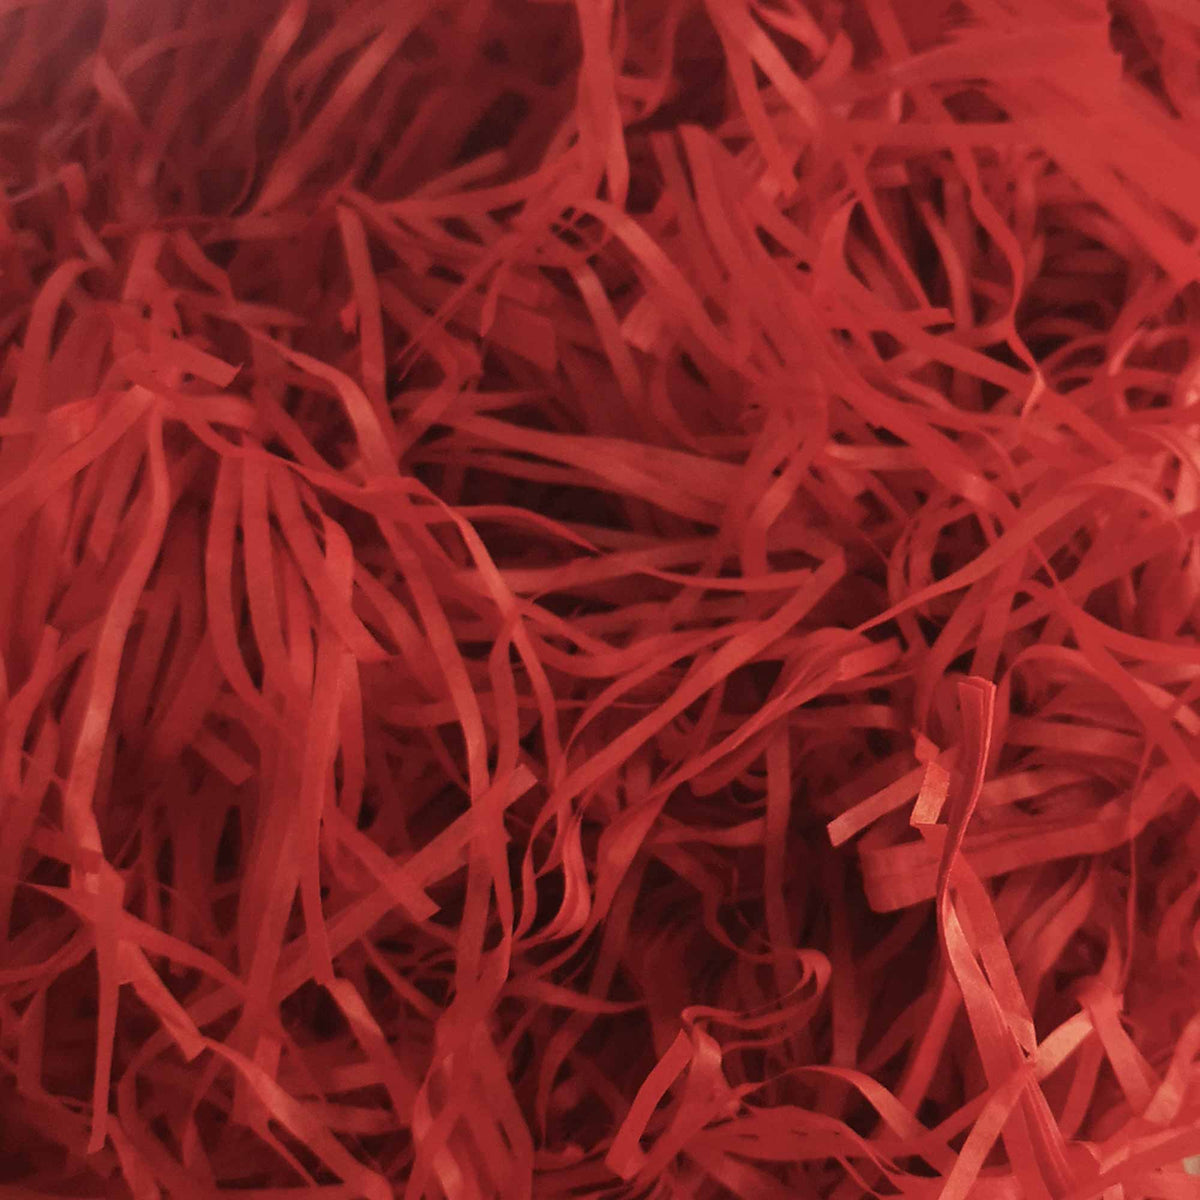 Shredded Tissue Paper for Packaging and Decor - Red